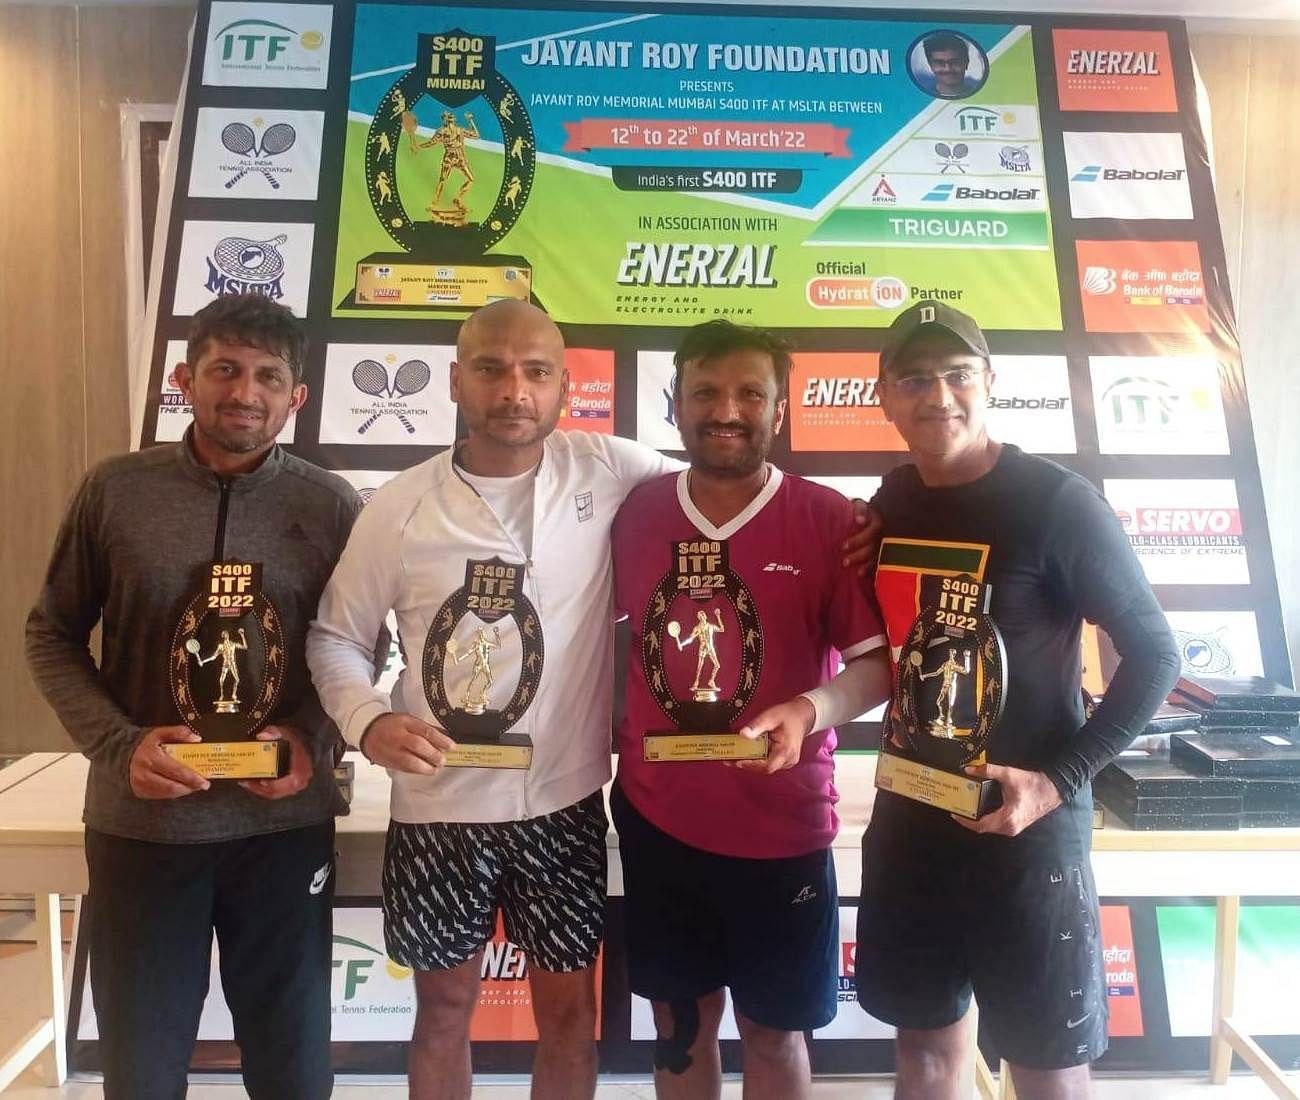 (L to R) Nitten Kirrtane, Nikhil Rao, winners of the 45 plus doubles, with opponents Yati Gujarathi and Himanshu Bhatia in Mumbai on Wednesday. (Pic credit: MSLTA)